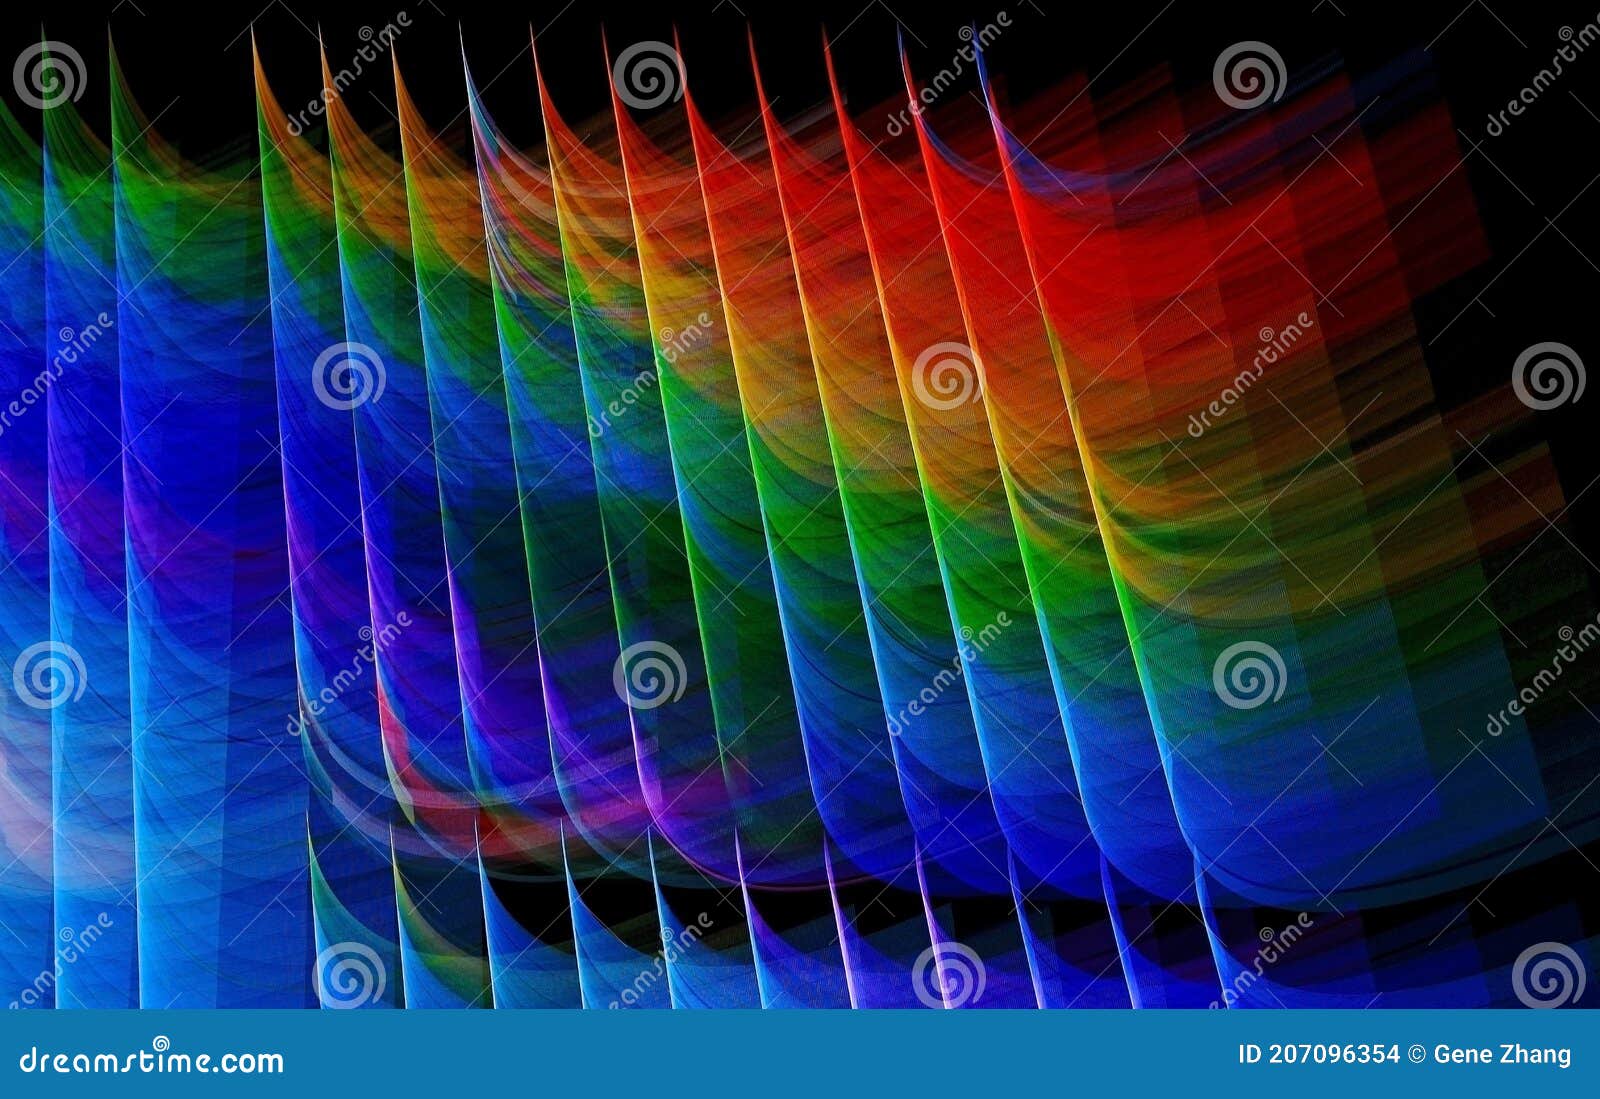 blurred lighting effect in the colors of rainbow